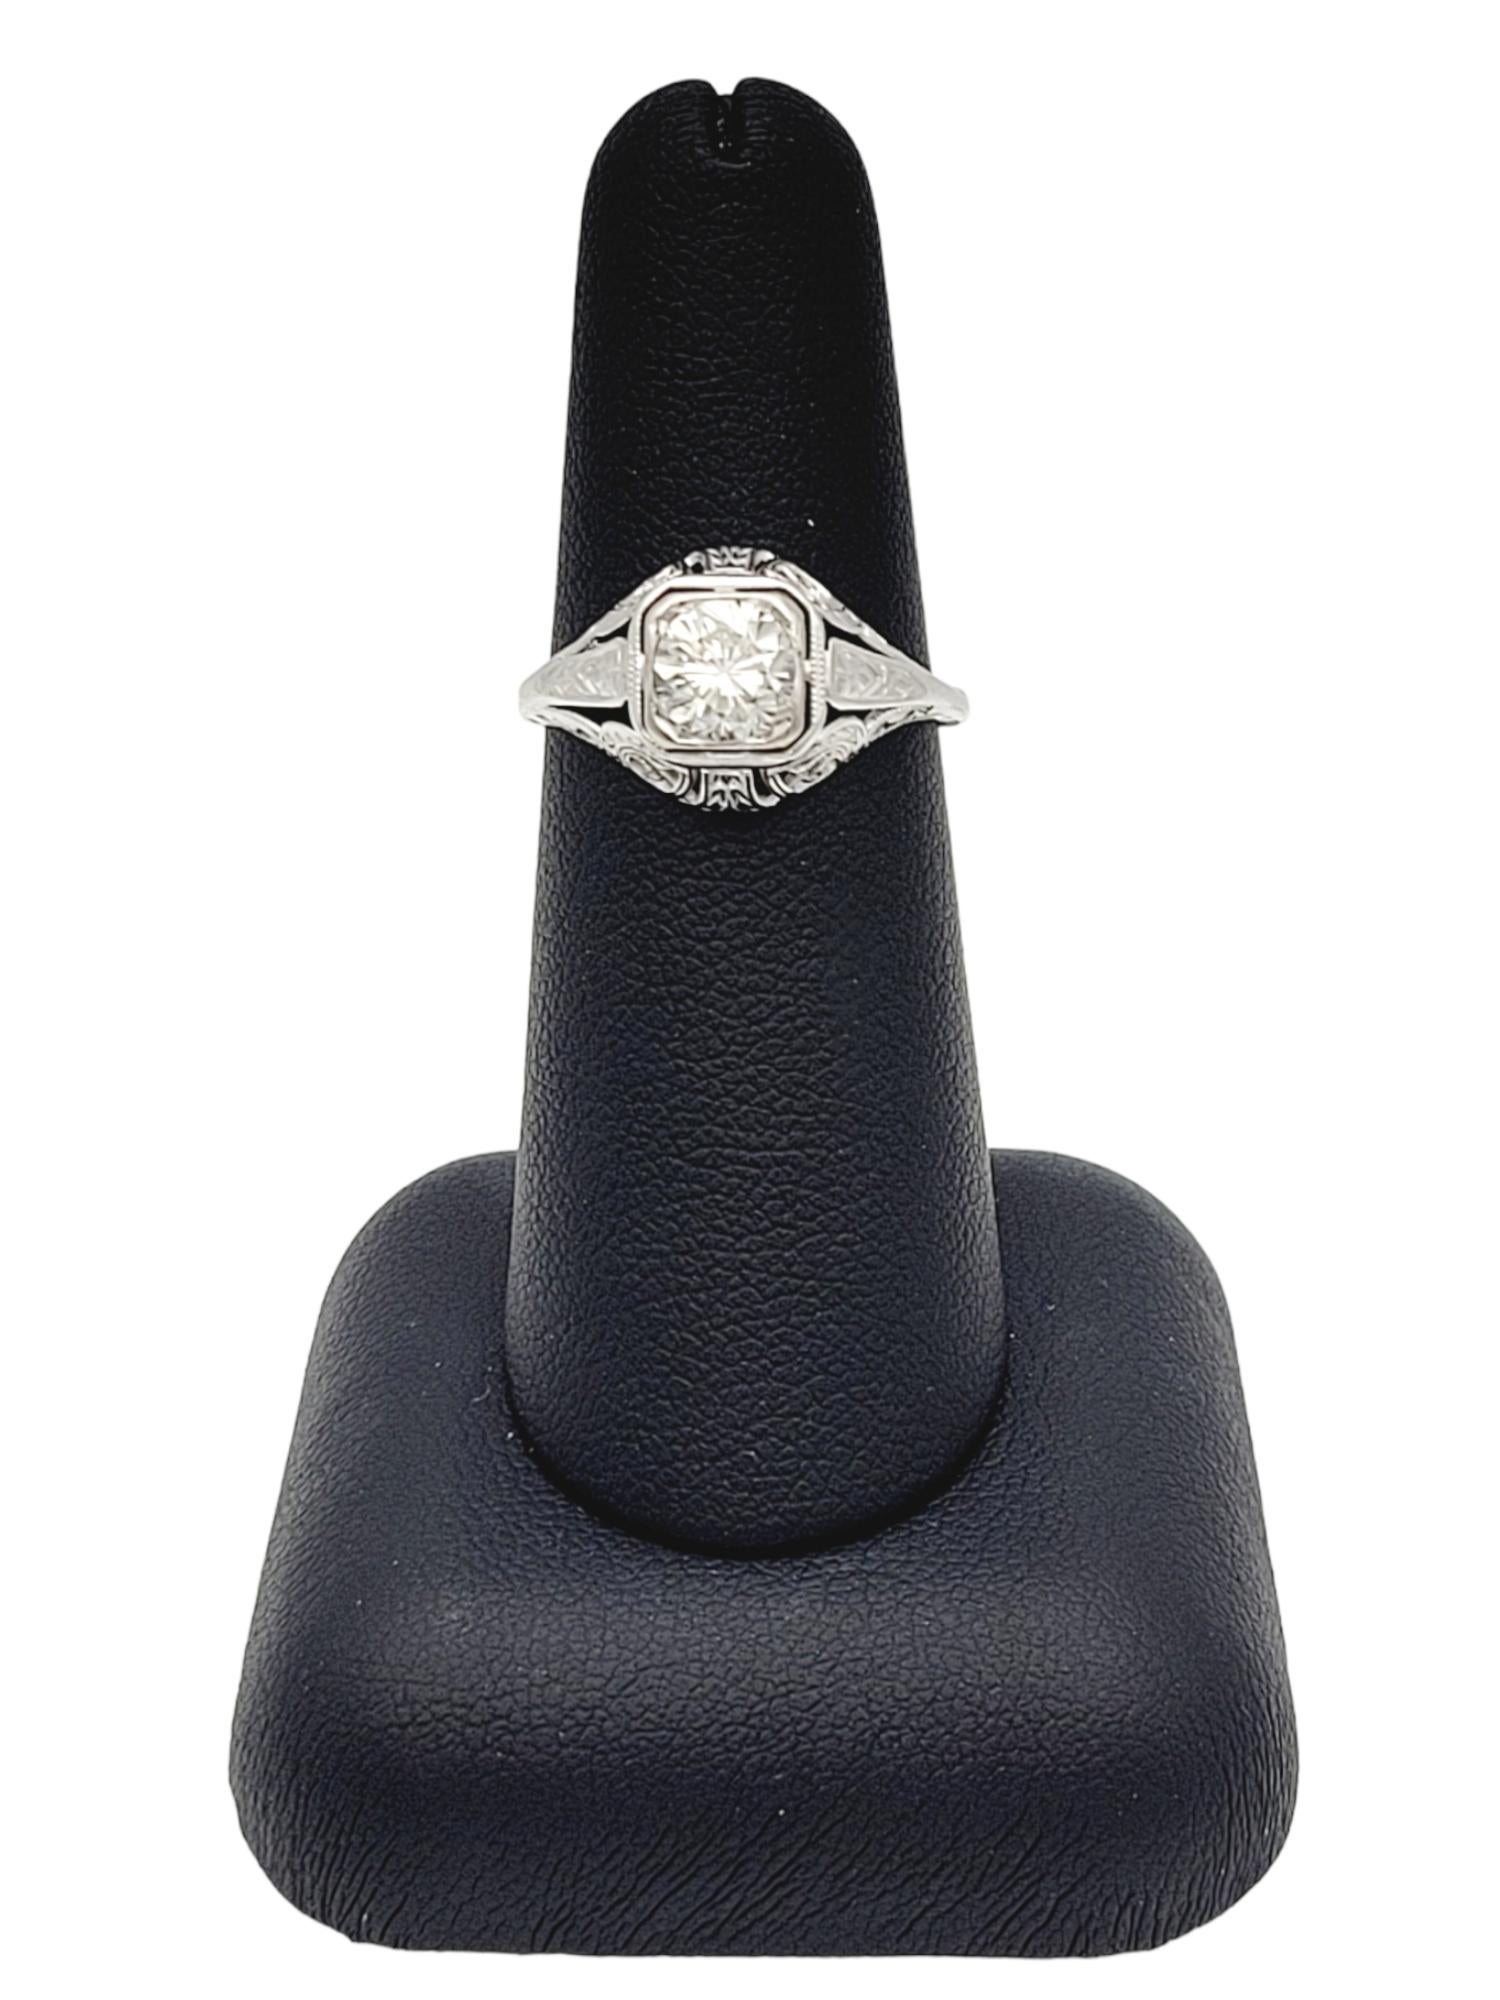 Vintage 0.83 Carat Solitaire Diamond Engagement Ring in 14 Karat White Gold For Sale 4